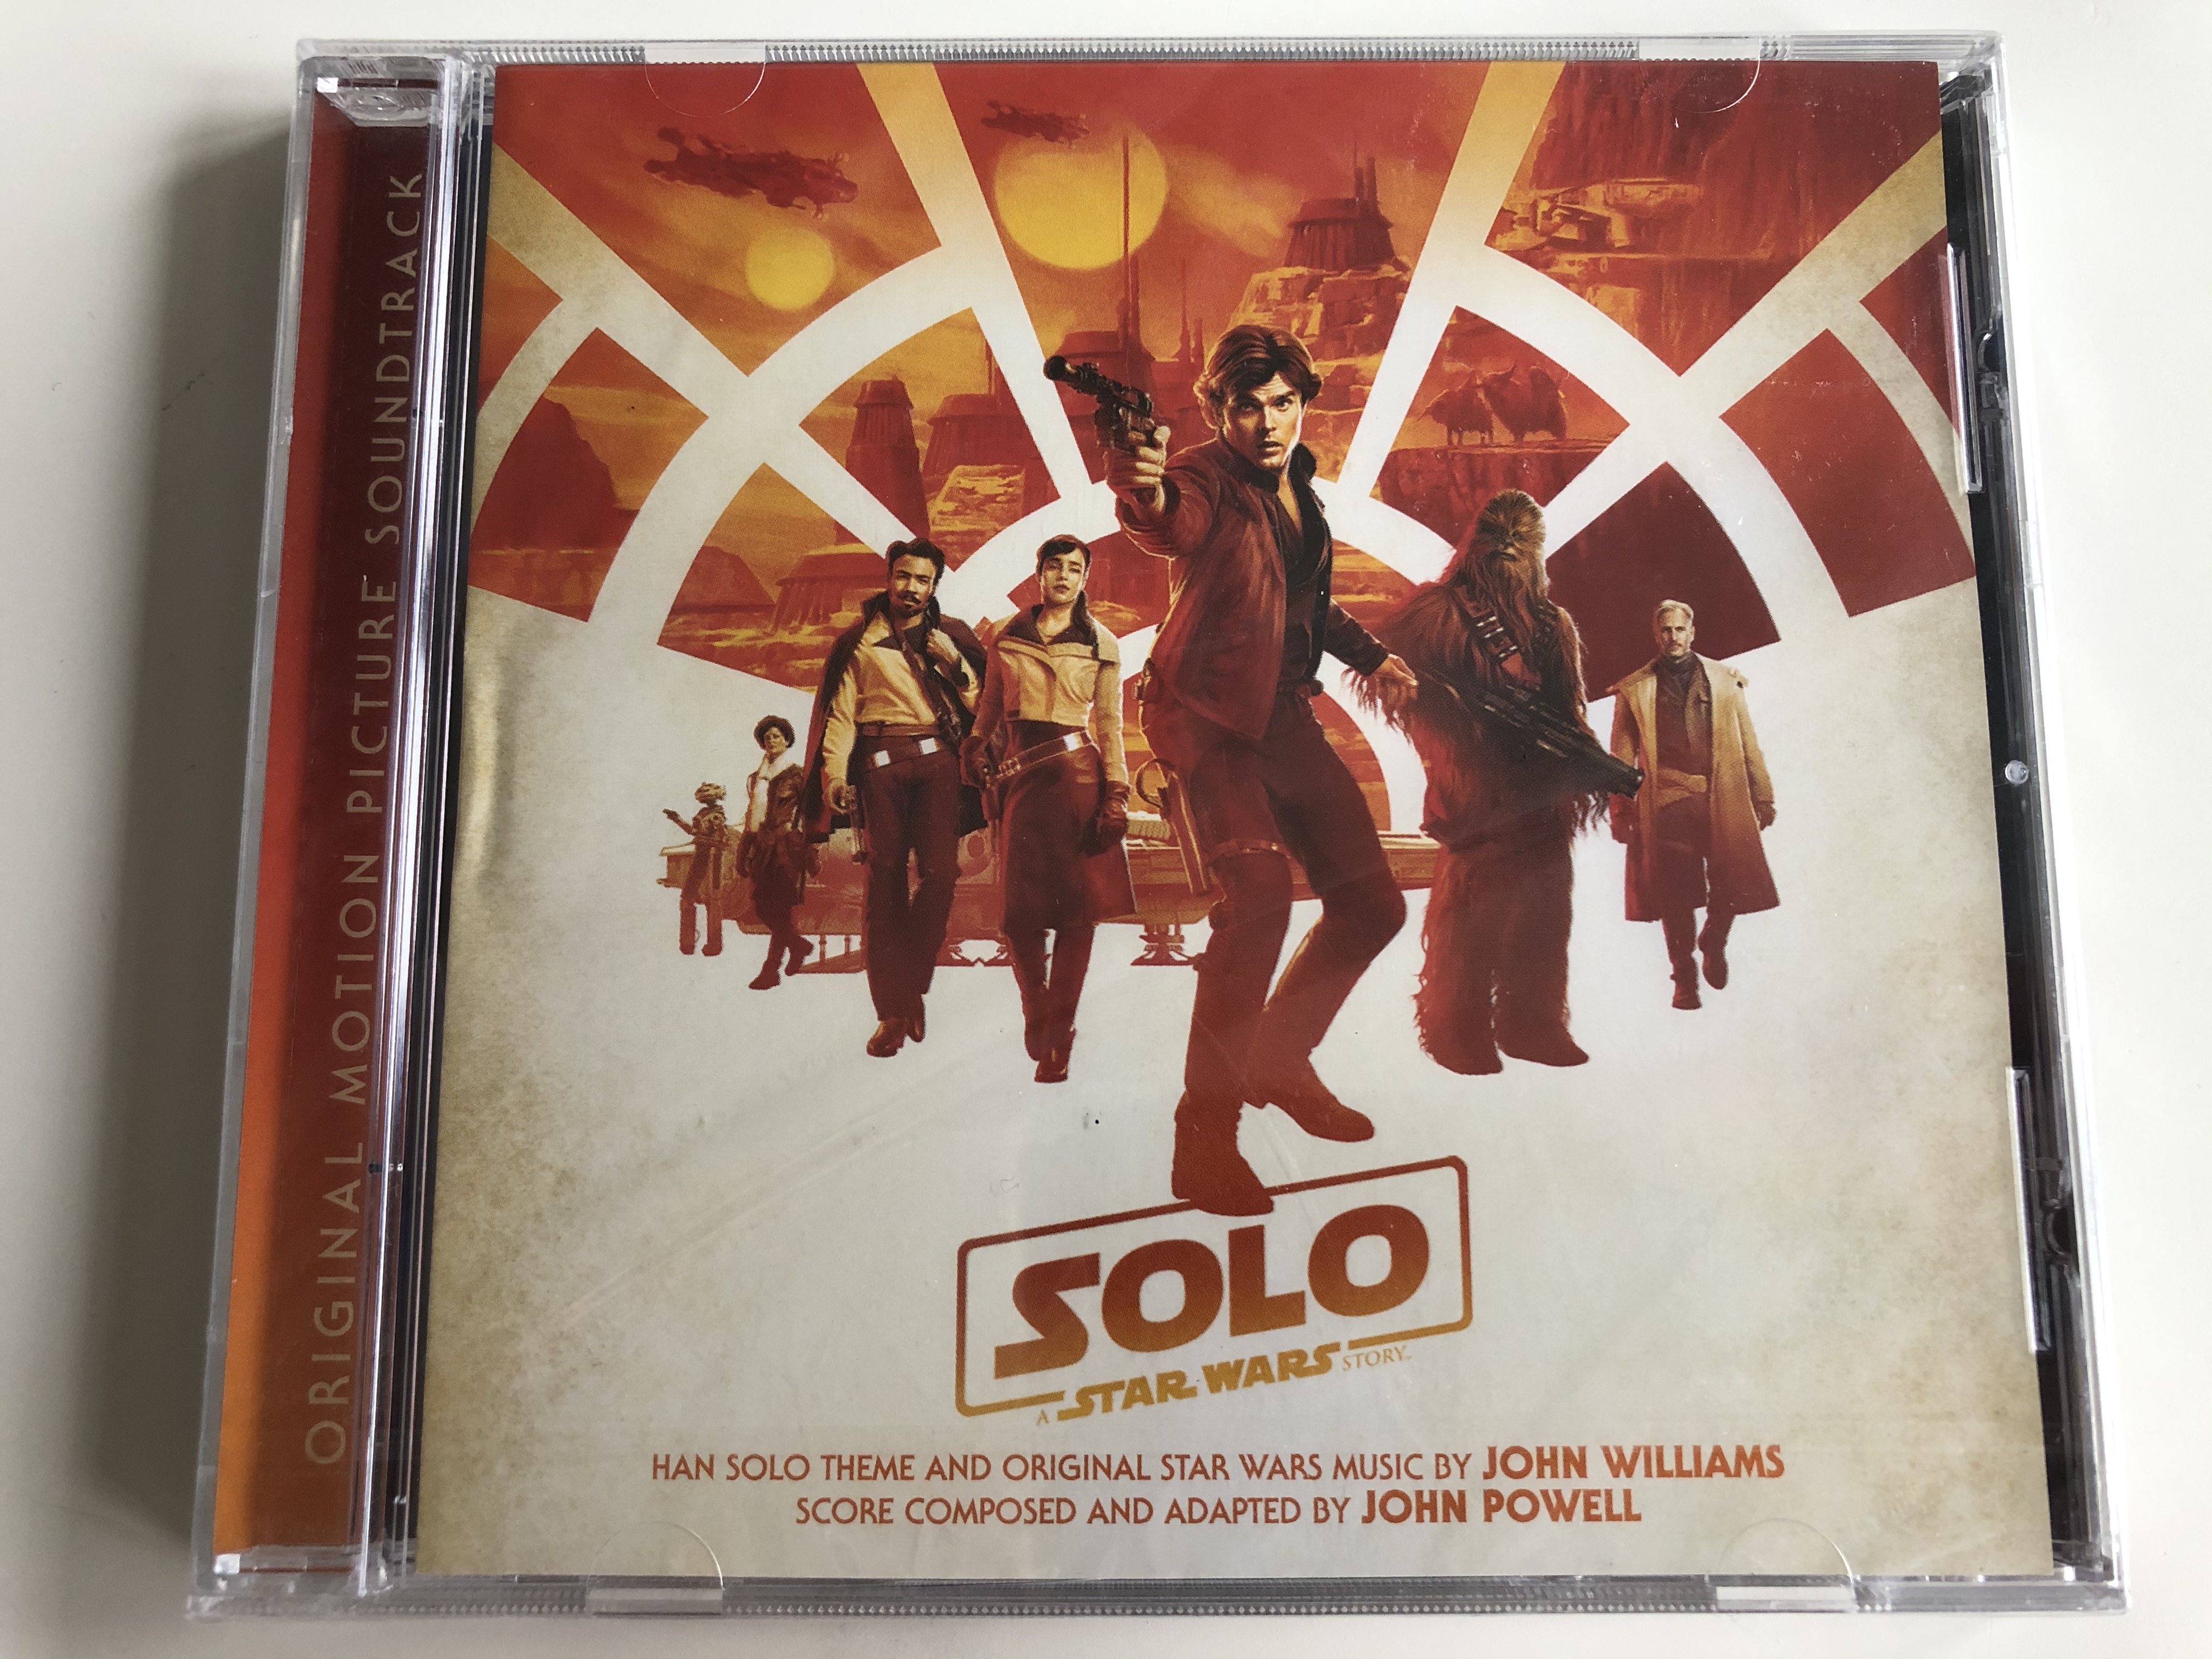 solo-a-star-wars-han-solo-theme-and-original-star-wars-music-by-john-williams-score-composed-by-adapted-by-john-powell-walt-disney-records-audio-cd-2018-050087385996-1-.jpg